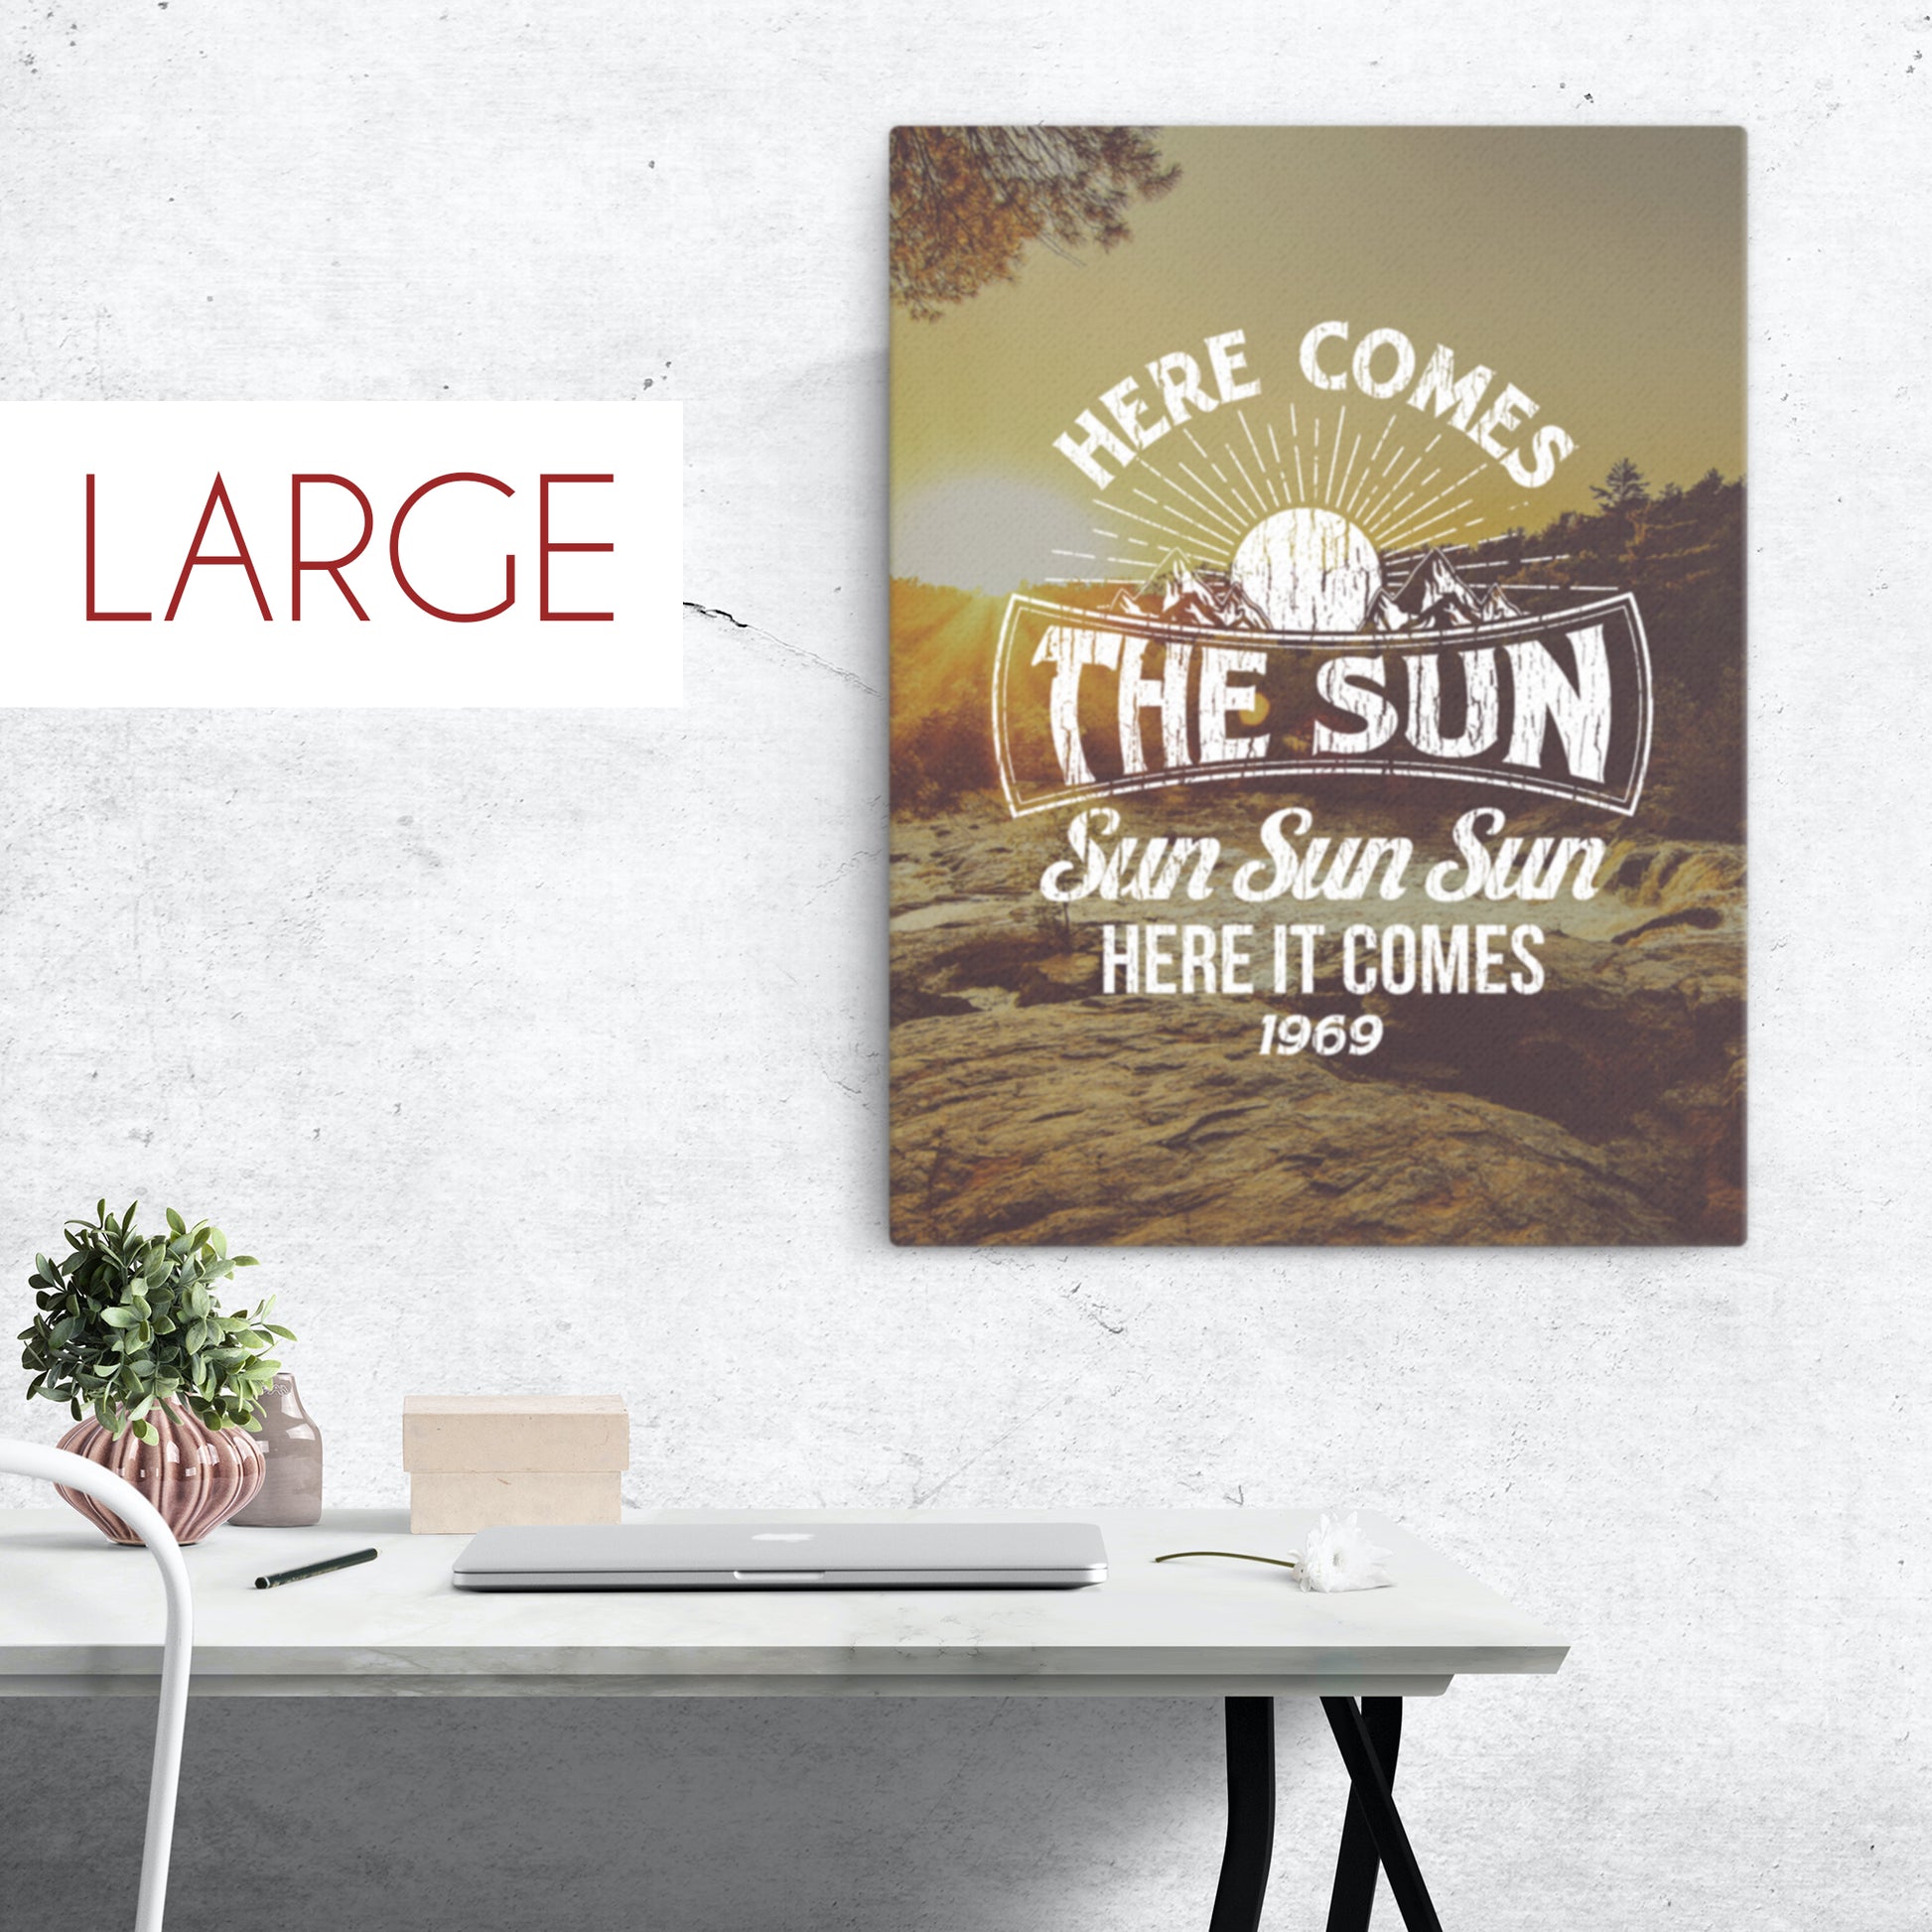 The Beatles - Here Comes The Sun - Large Canvas